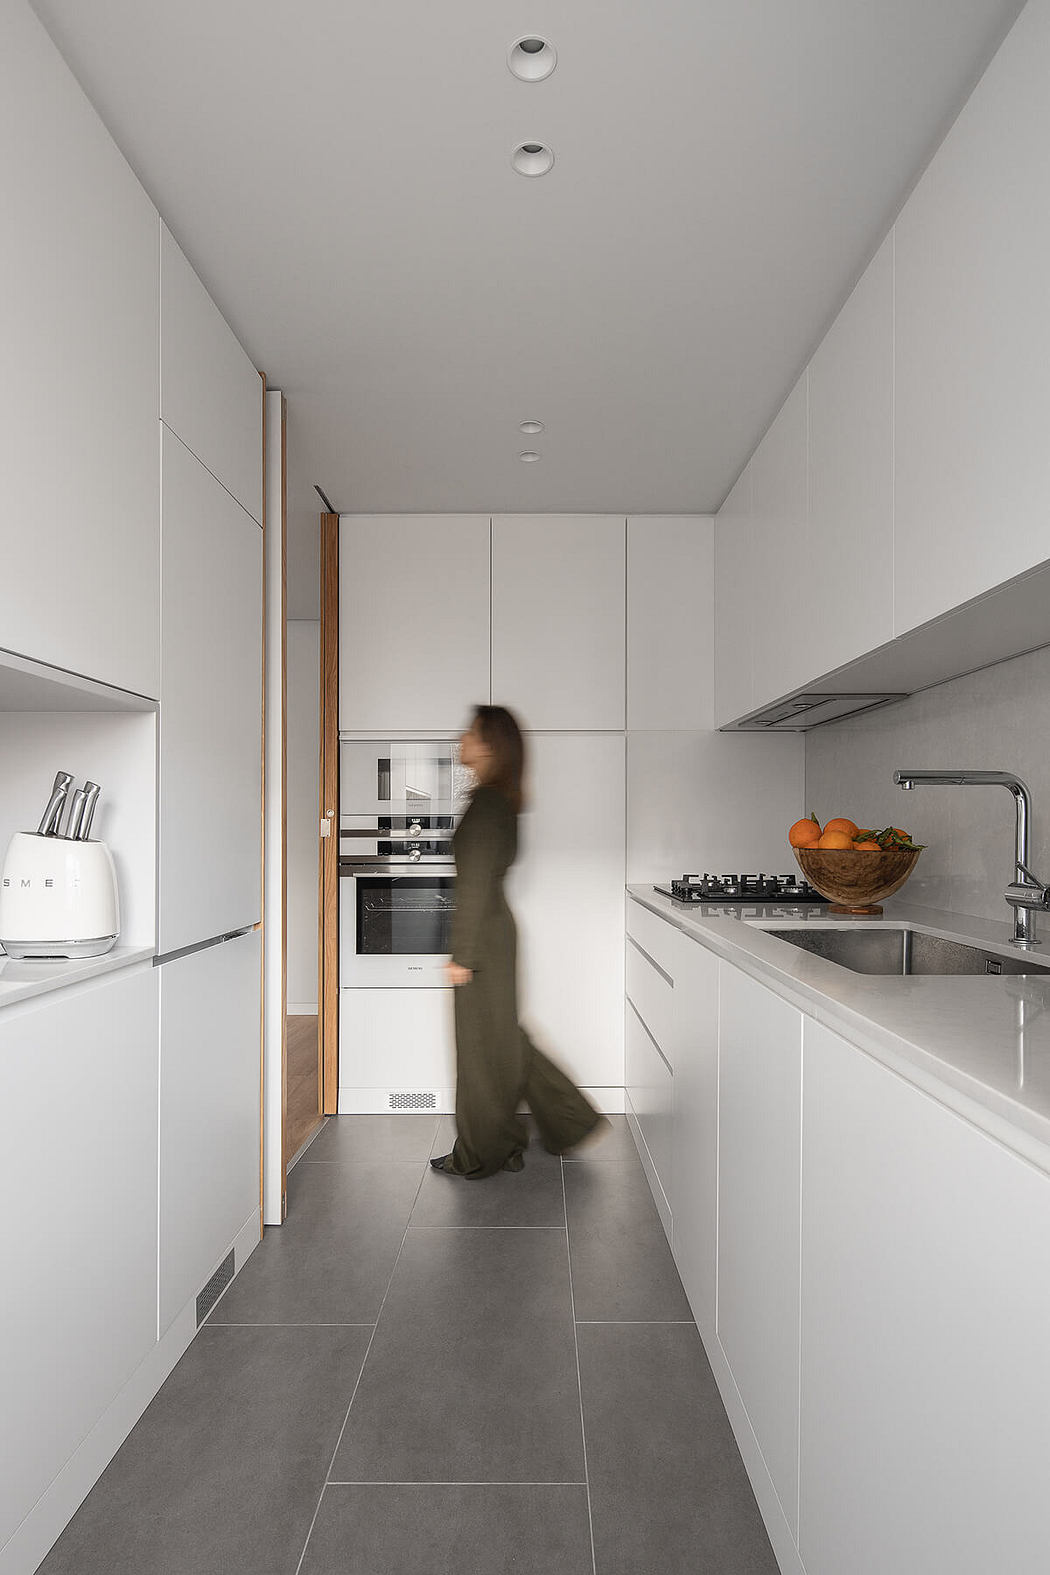 Modern kitchen with white cabinets, stainless steel appliances, and a person in motion.